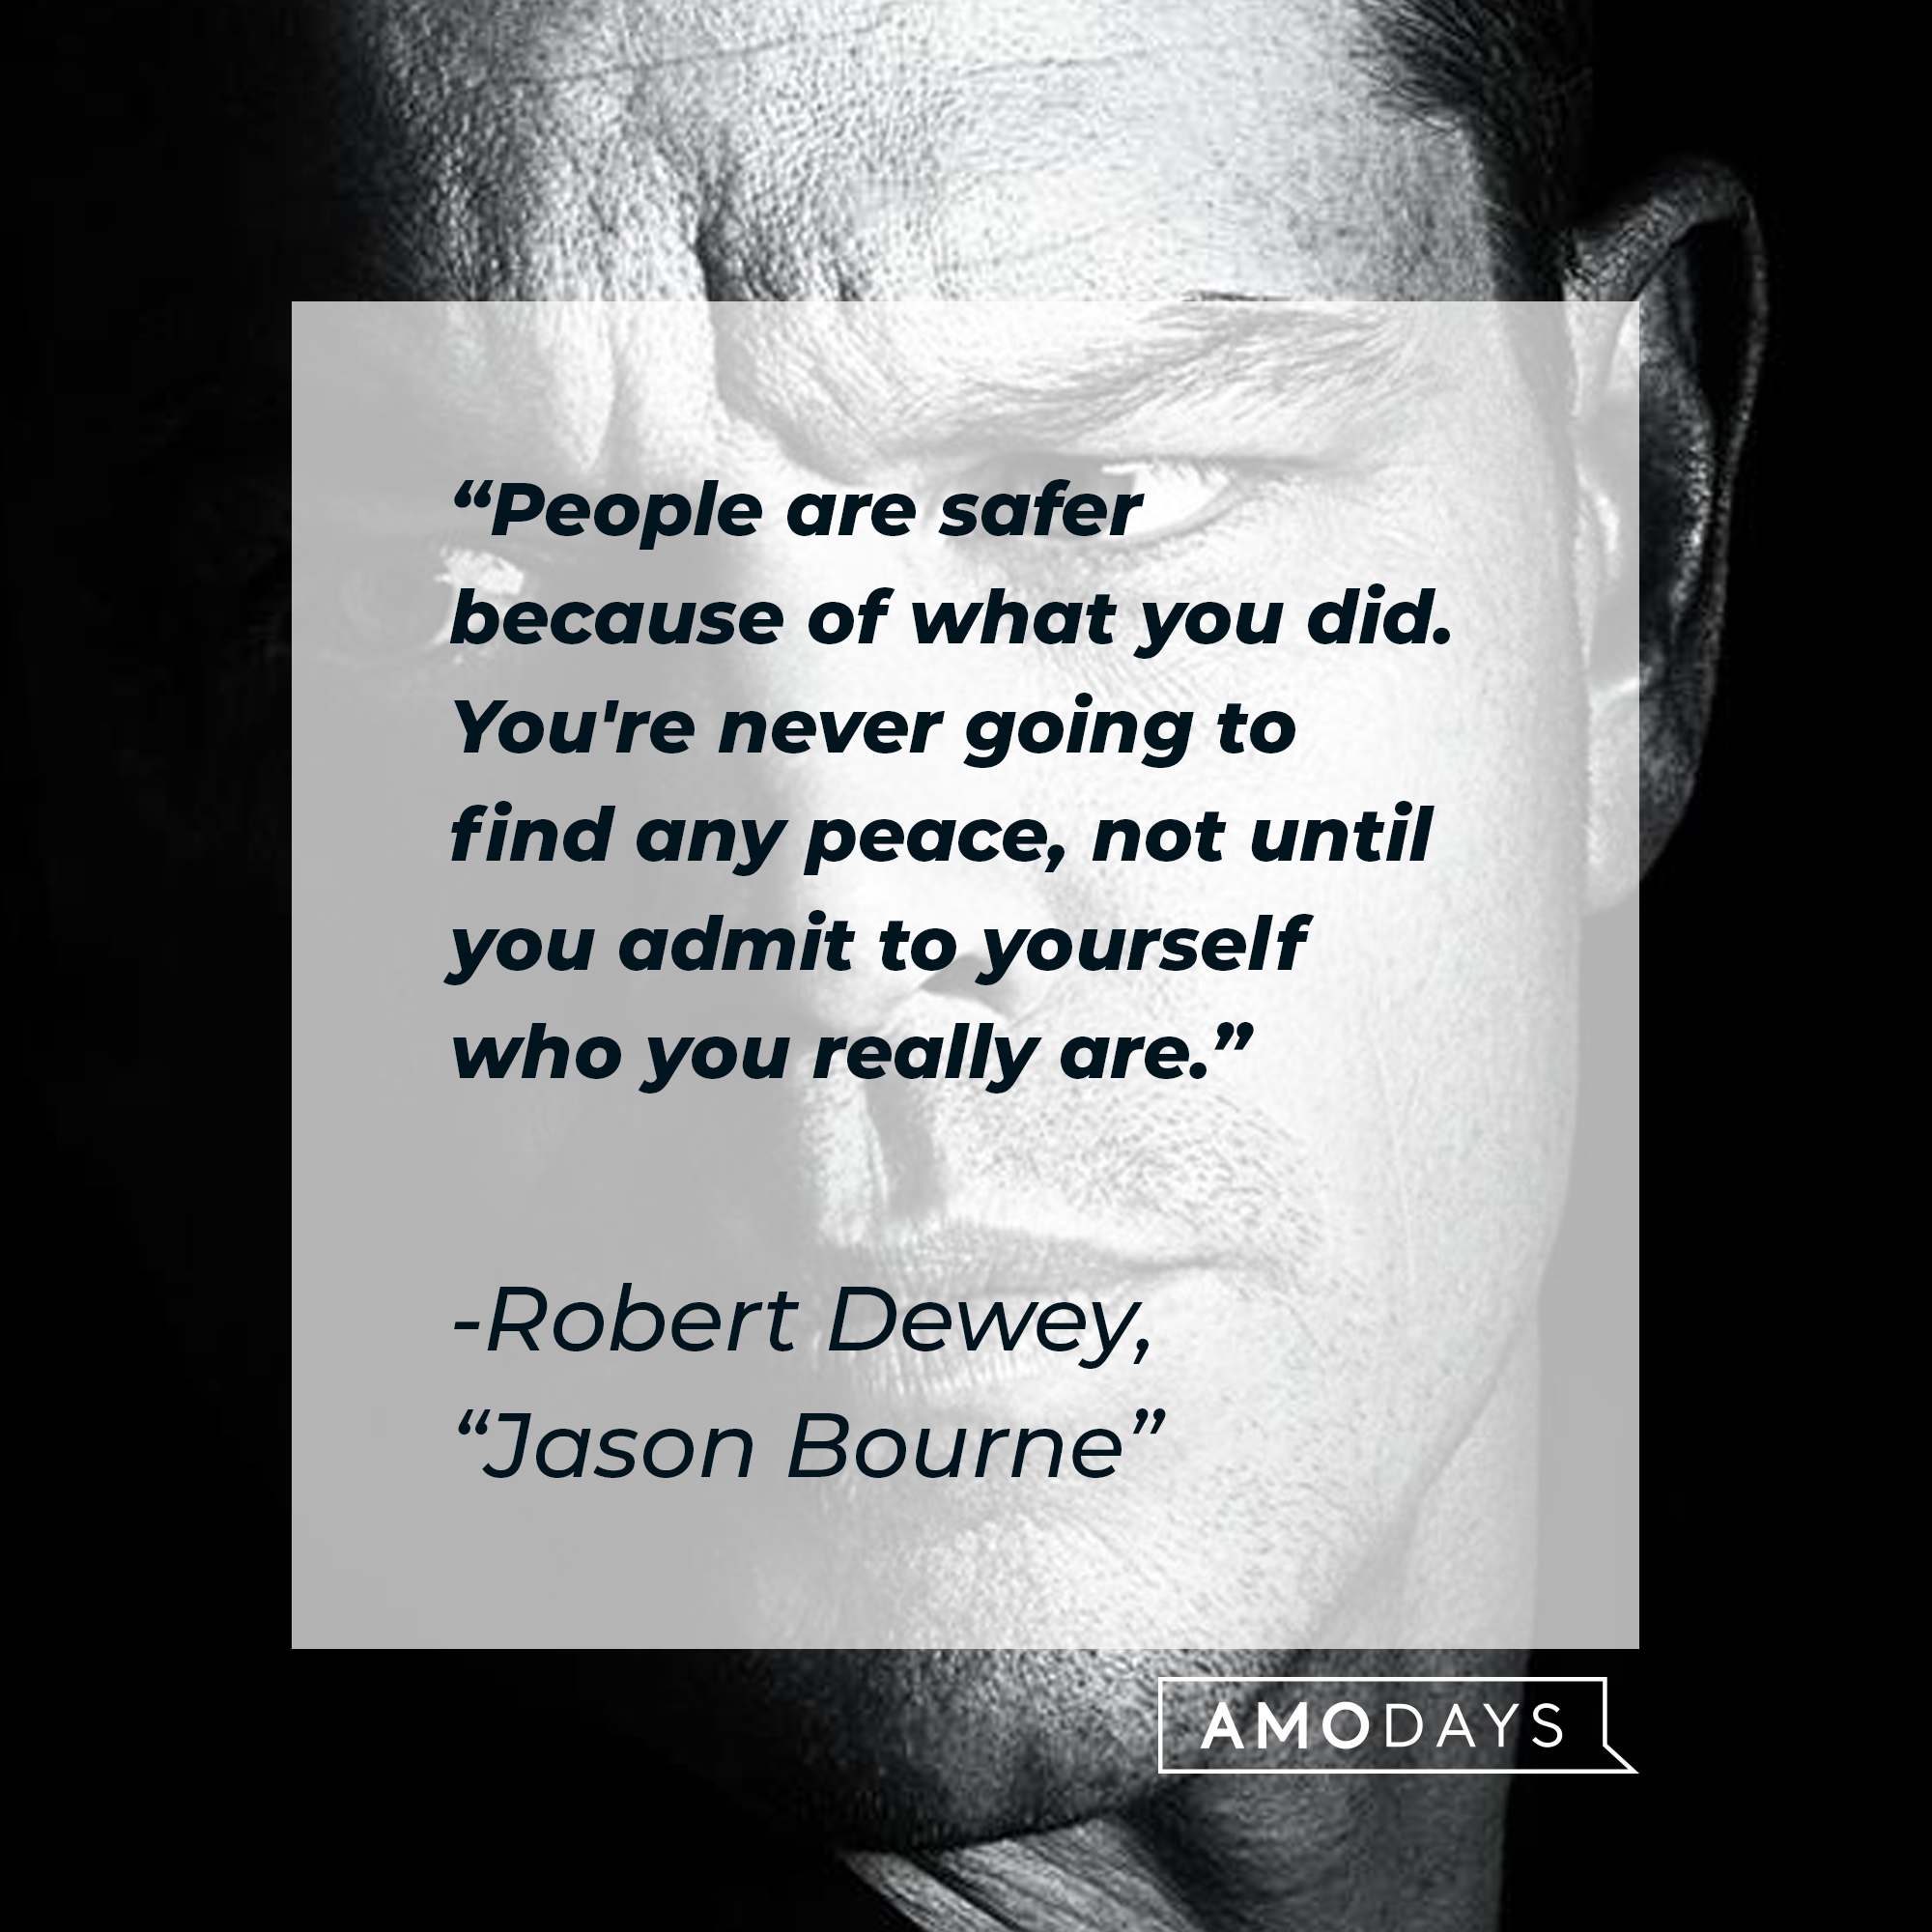 Robert Dewey quote: "People are safer because of what you did. You're never going to find any peace, not until you admit to yourself who you really are." | Source: facebook.com/TheBourneSeries